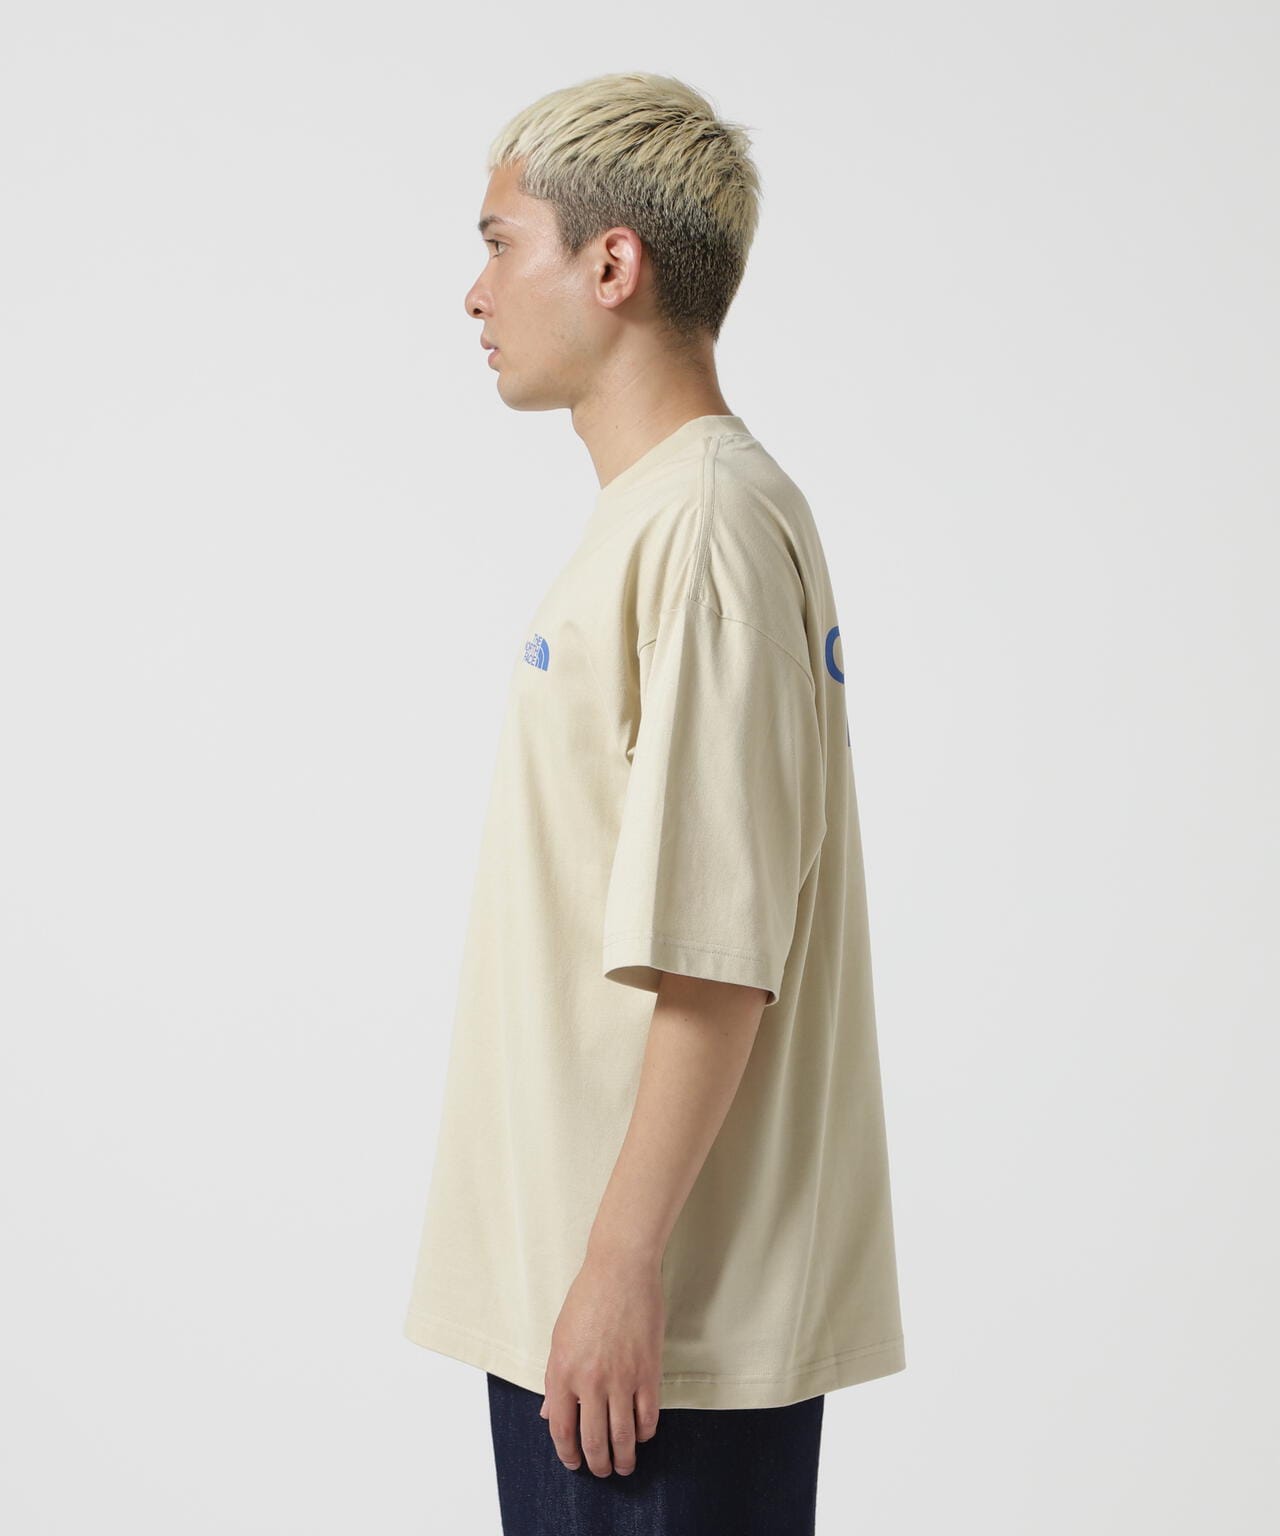 THE NORTH FACE　S/S simple color scheme tee NT32434